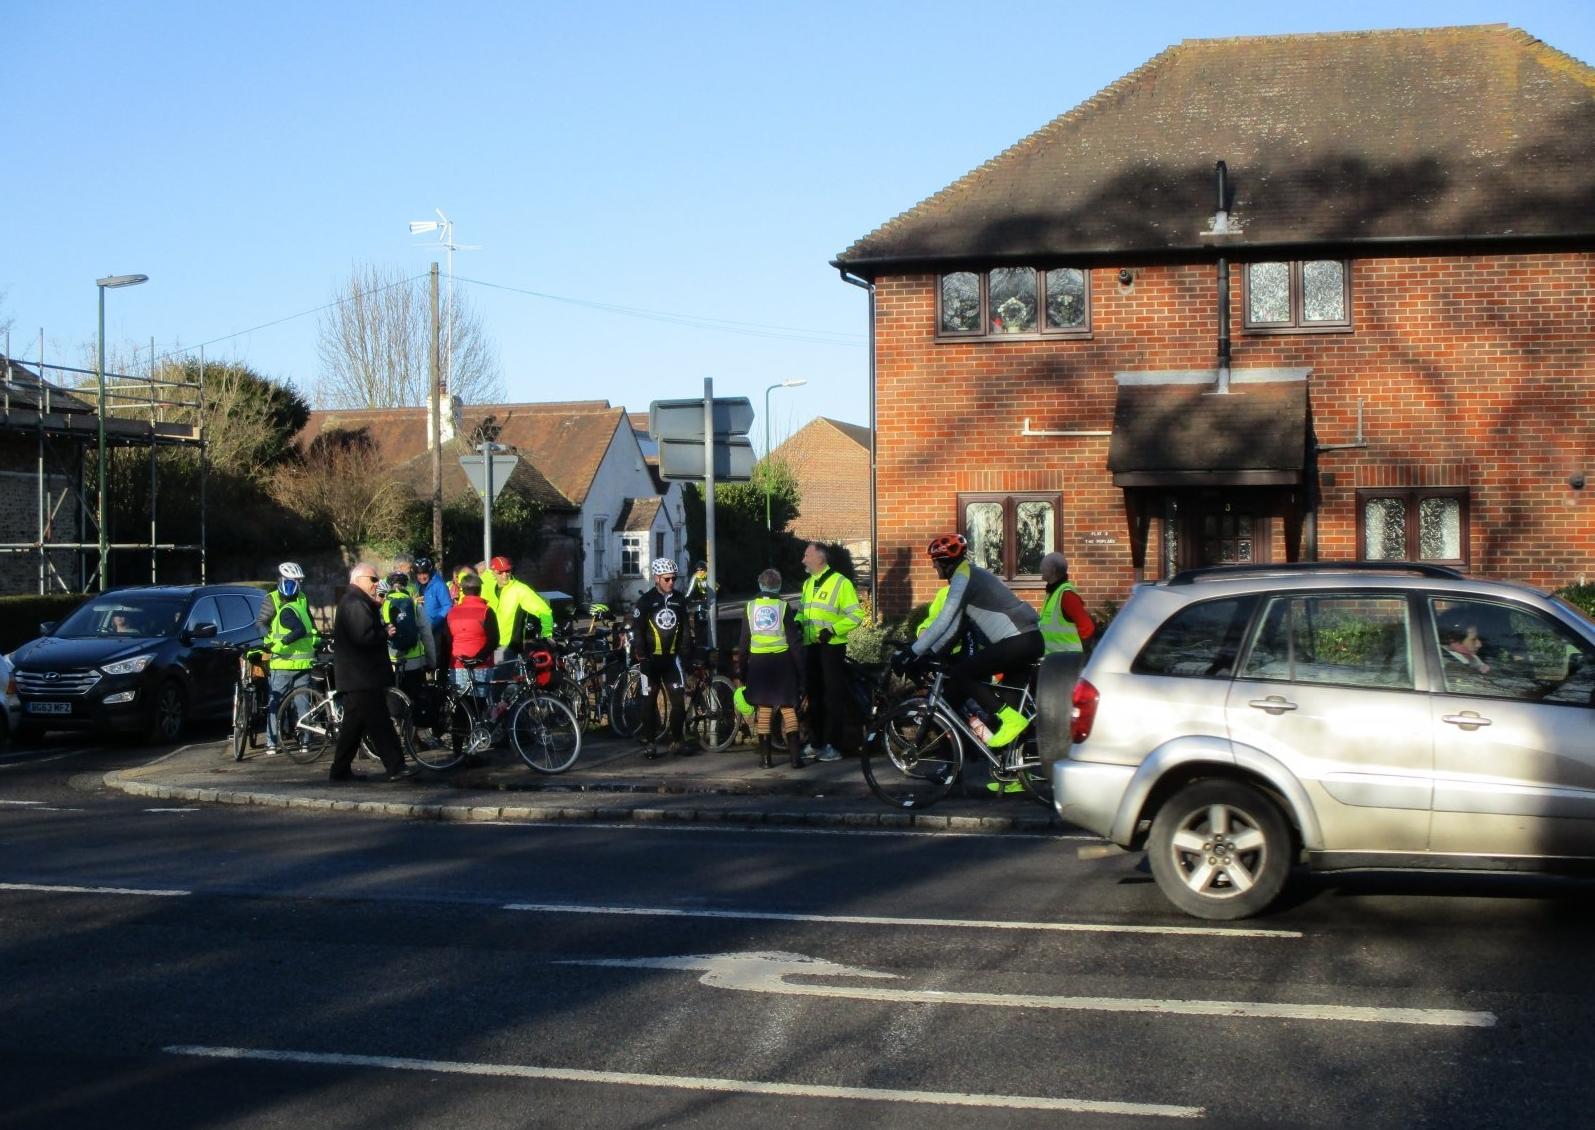 Following the death of well-known Bosham cyclist Gina McWilliam, a group of campaigners paid their respects and appealed for changes to the ‘inadequate’ road system at a well-attended event on Sunday. SUS-200122-104605001